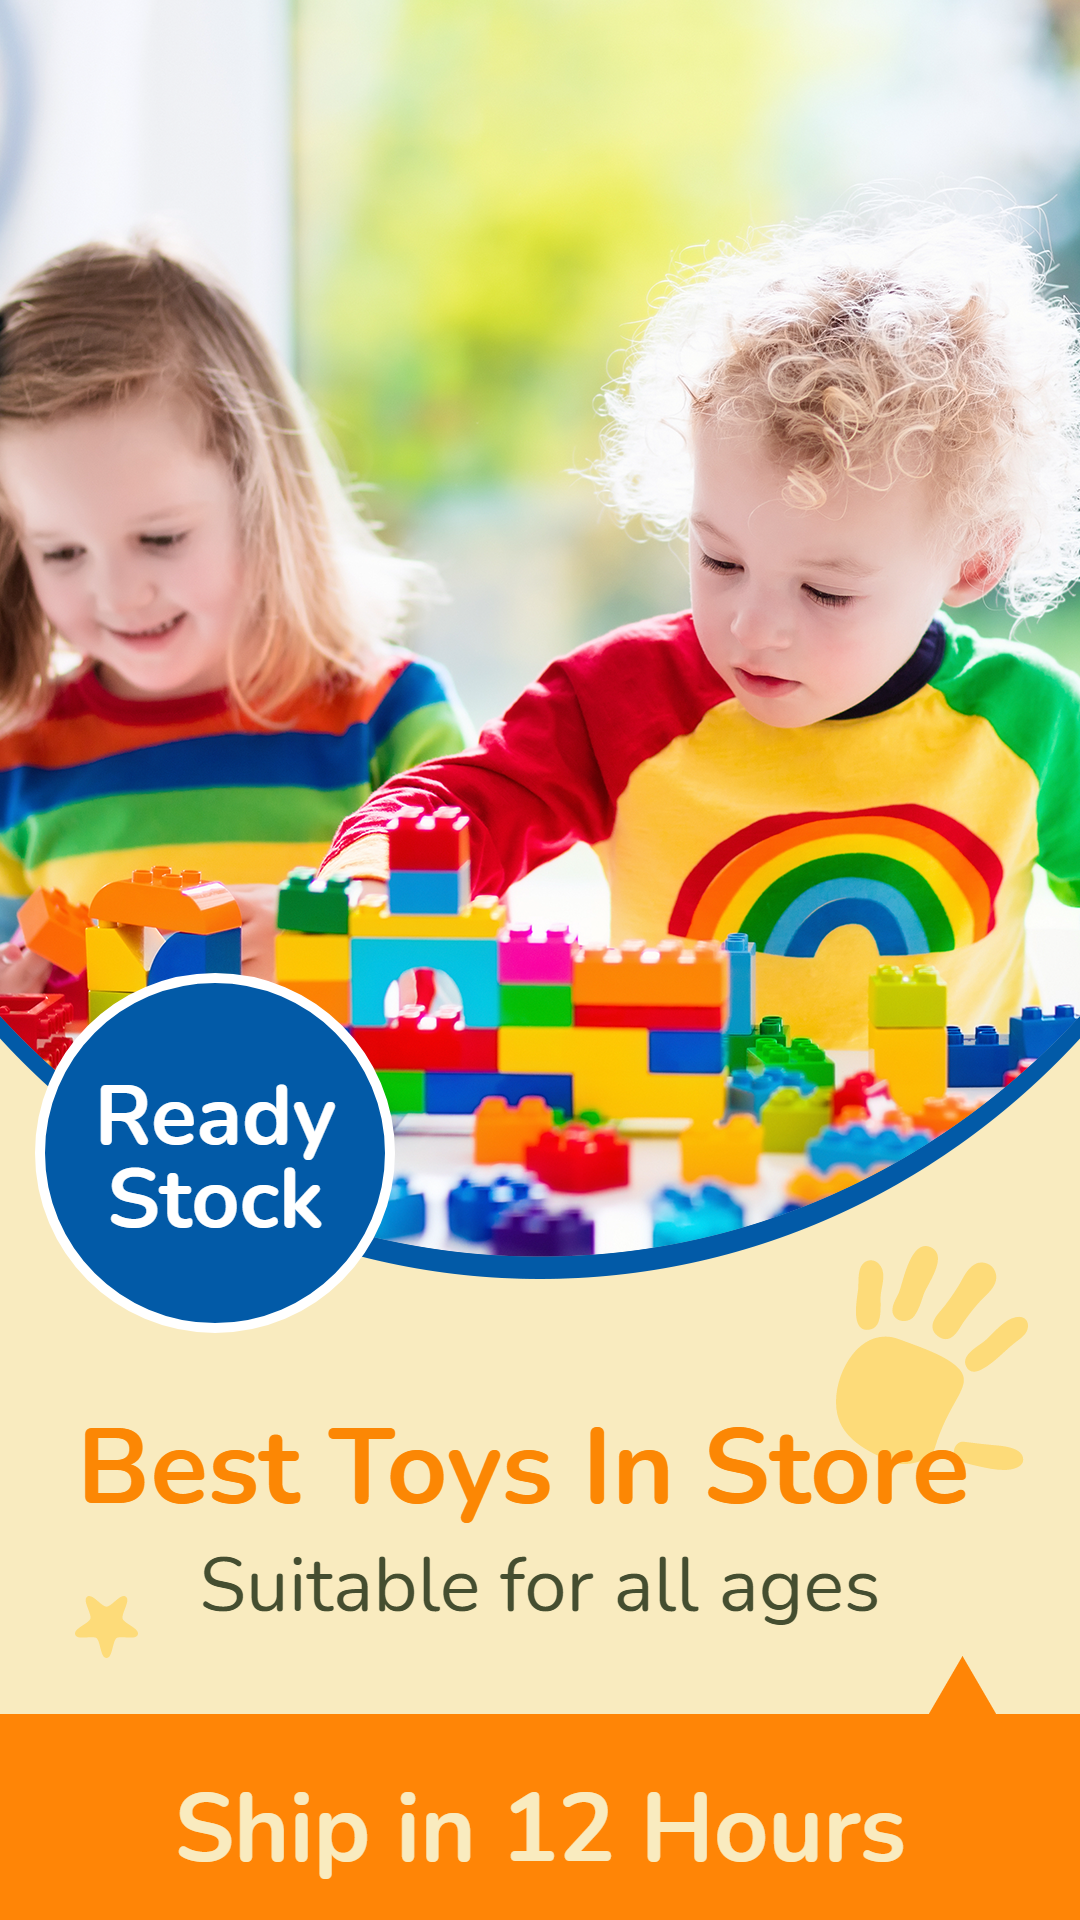 Children's Toys Promo Fast Shipping Ecommerce Story预览效果